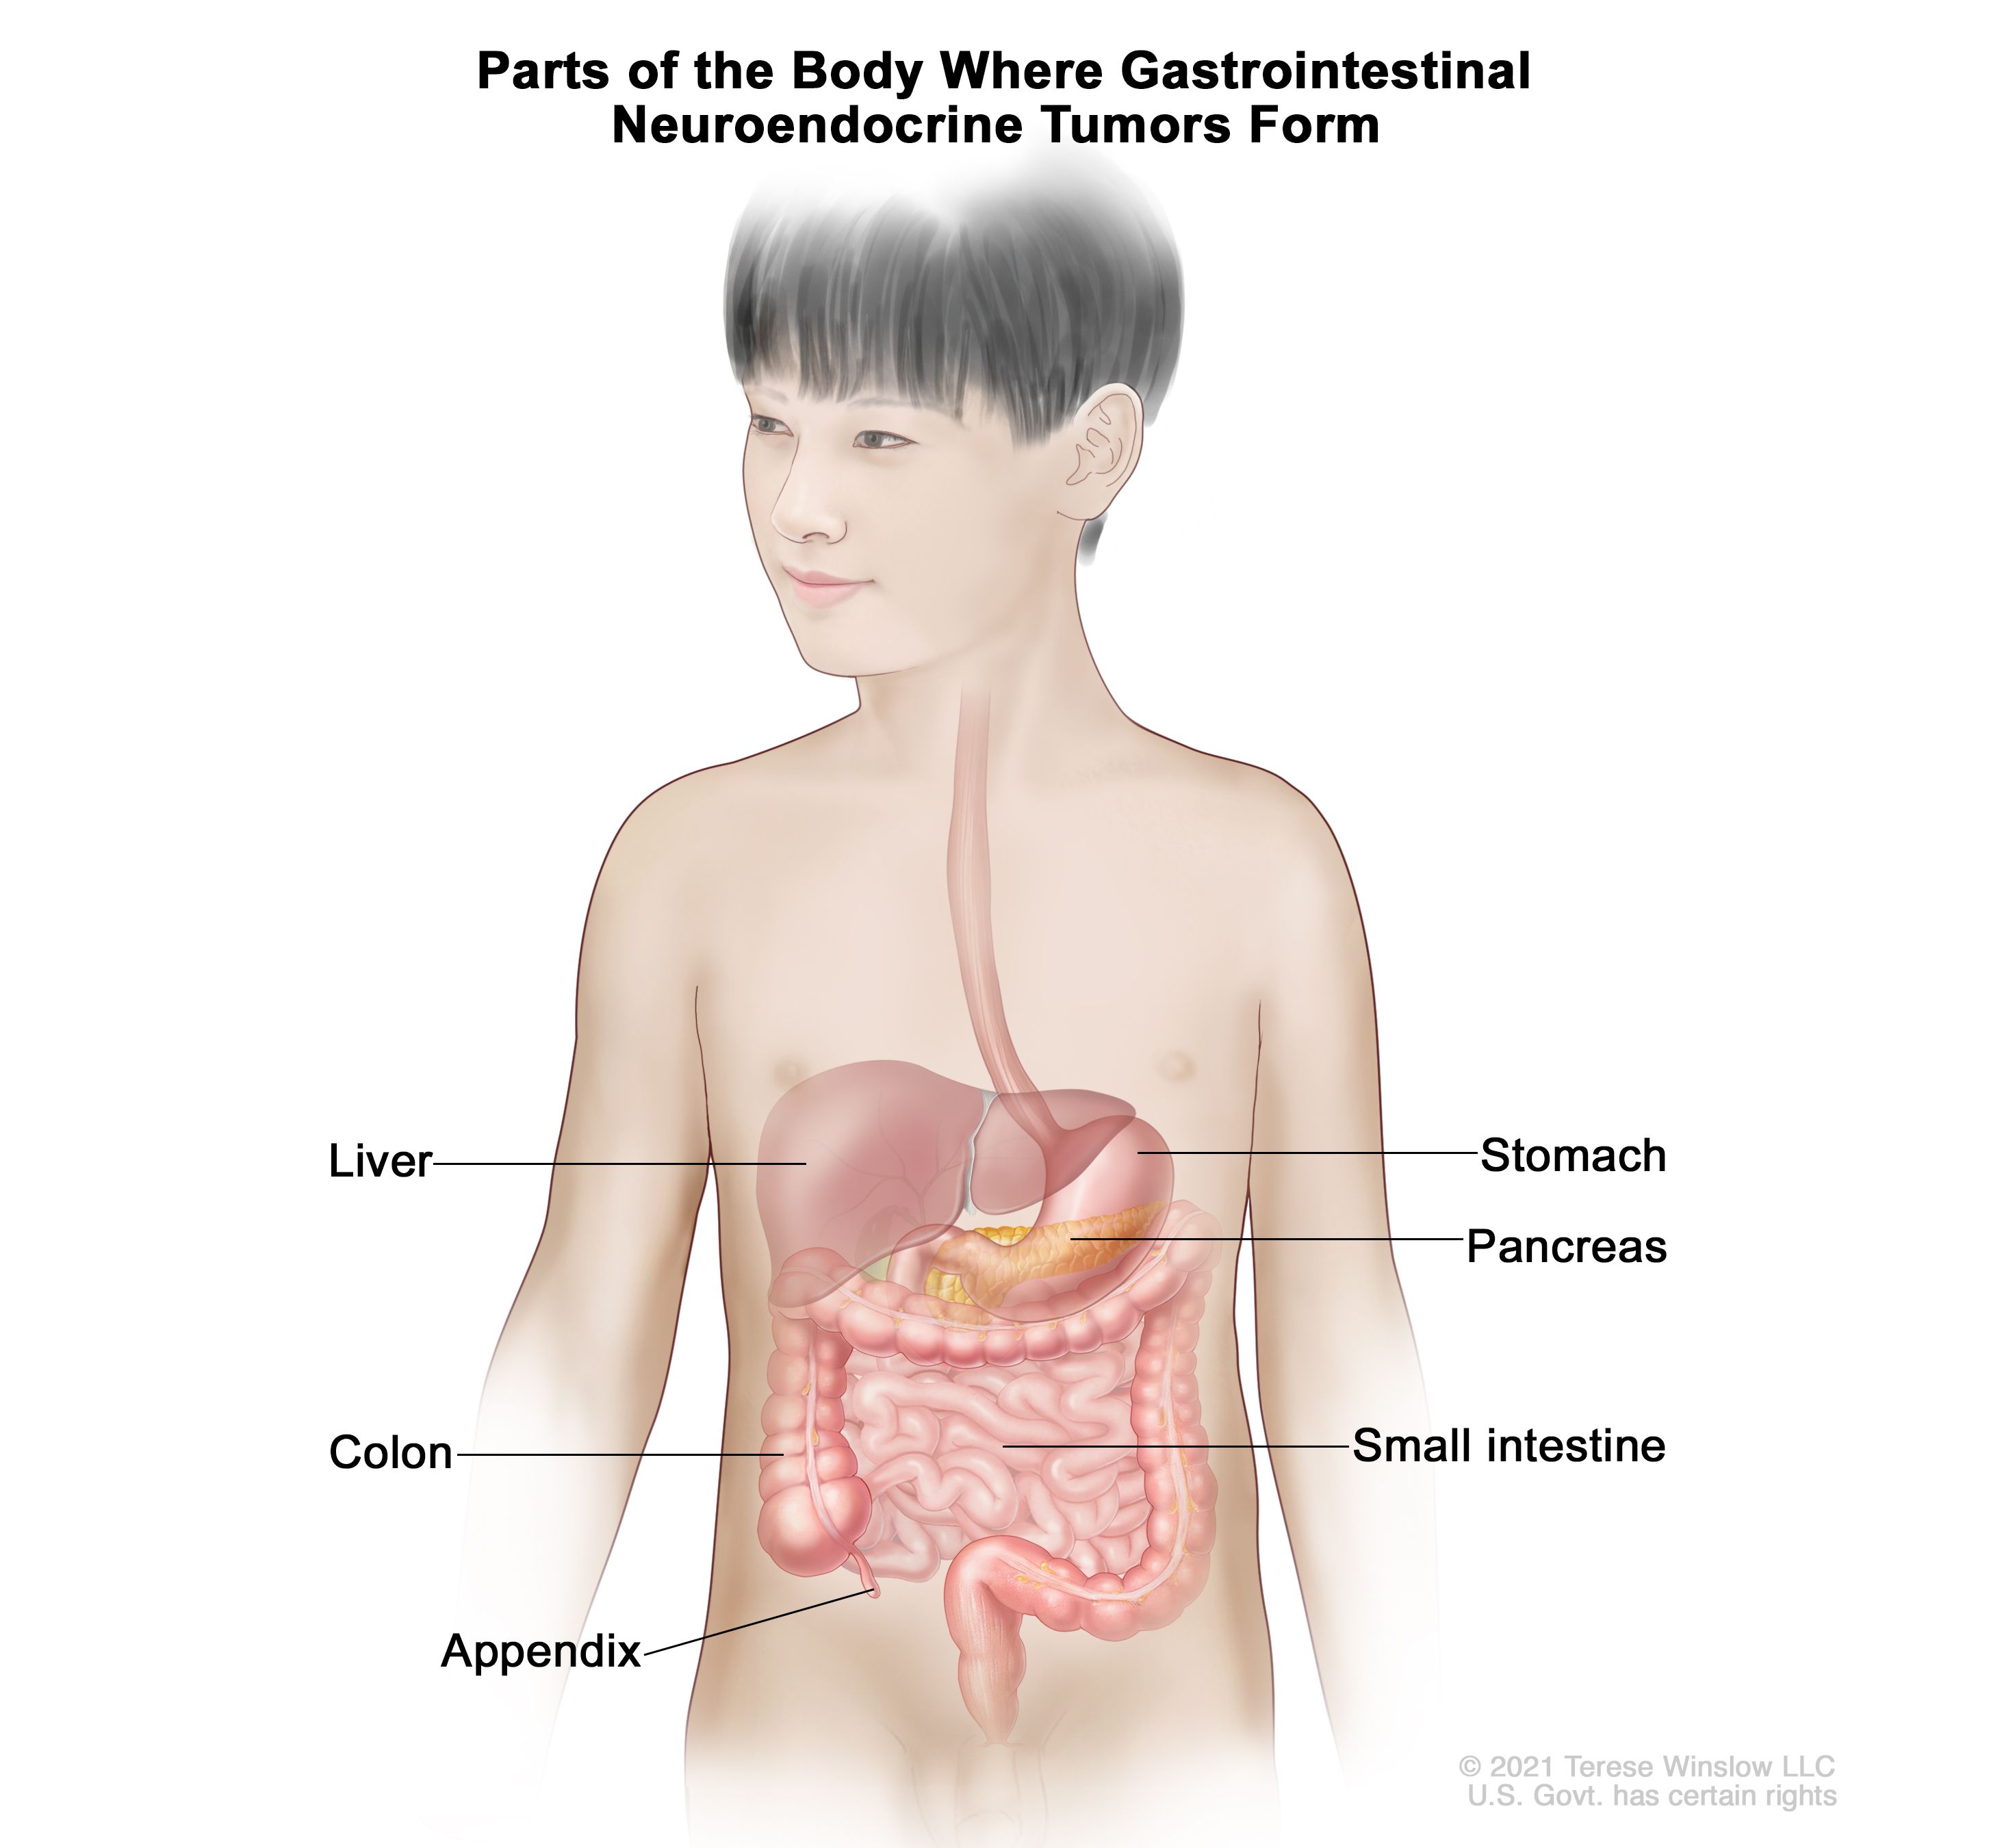 Parts of the body where gastrointestinal carcinoid tumors form; drawing of the gastrointestinal tract showing the liver, stomach, pancreas, small intestine, colon, and appendix.